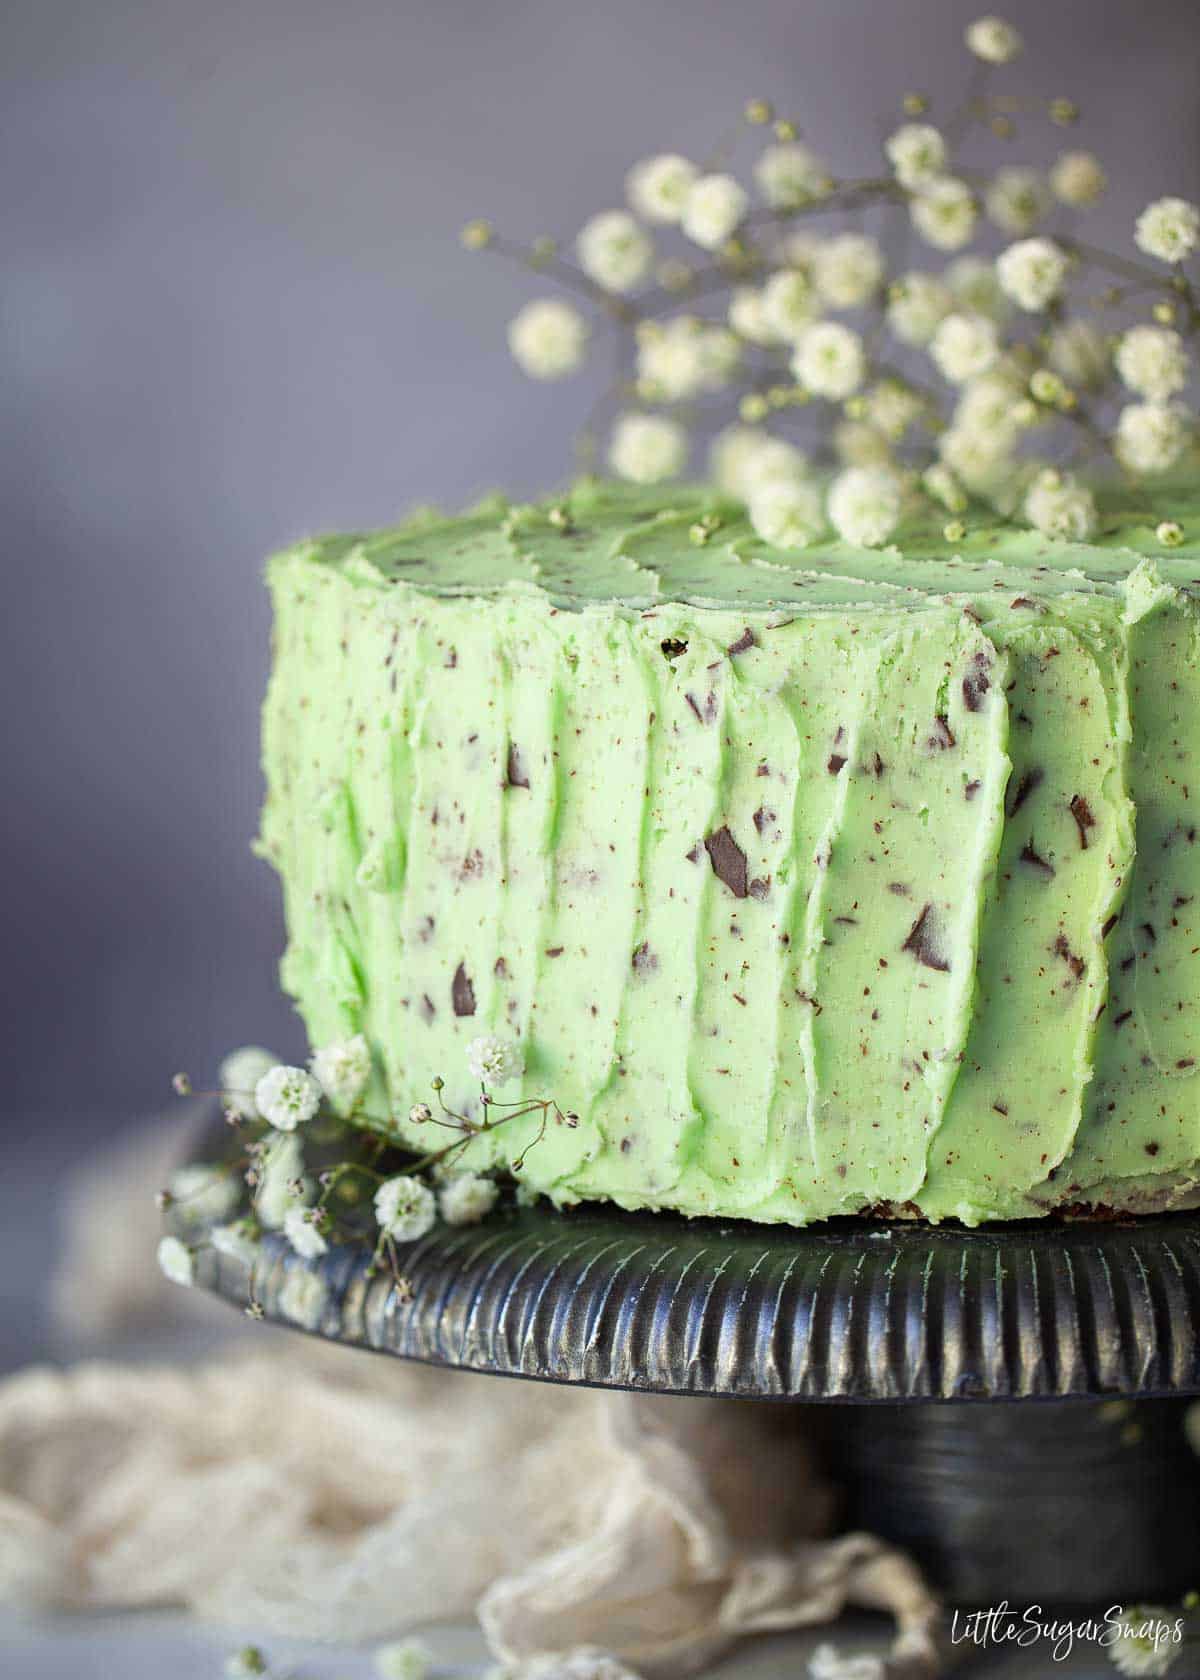 Close-up of a mint chocolate chip cake garnished with flowers.